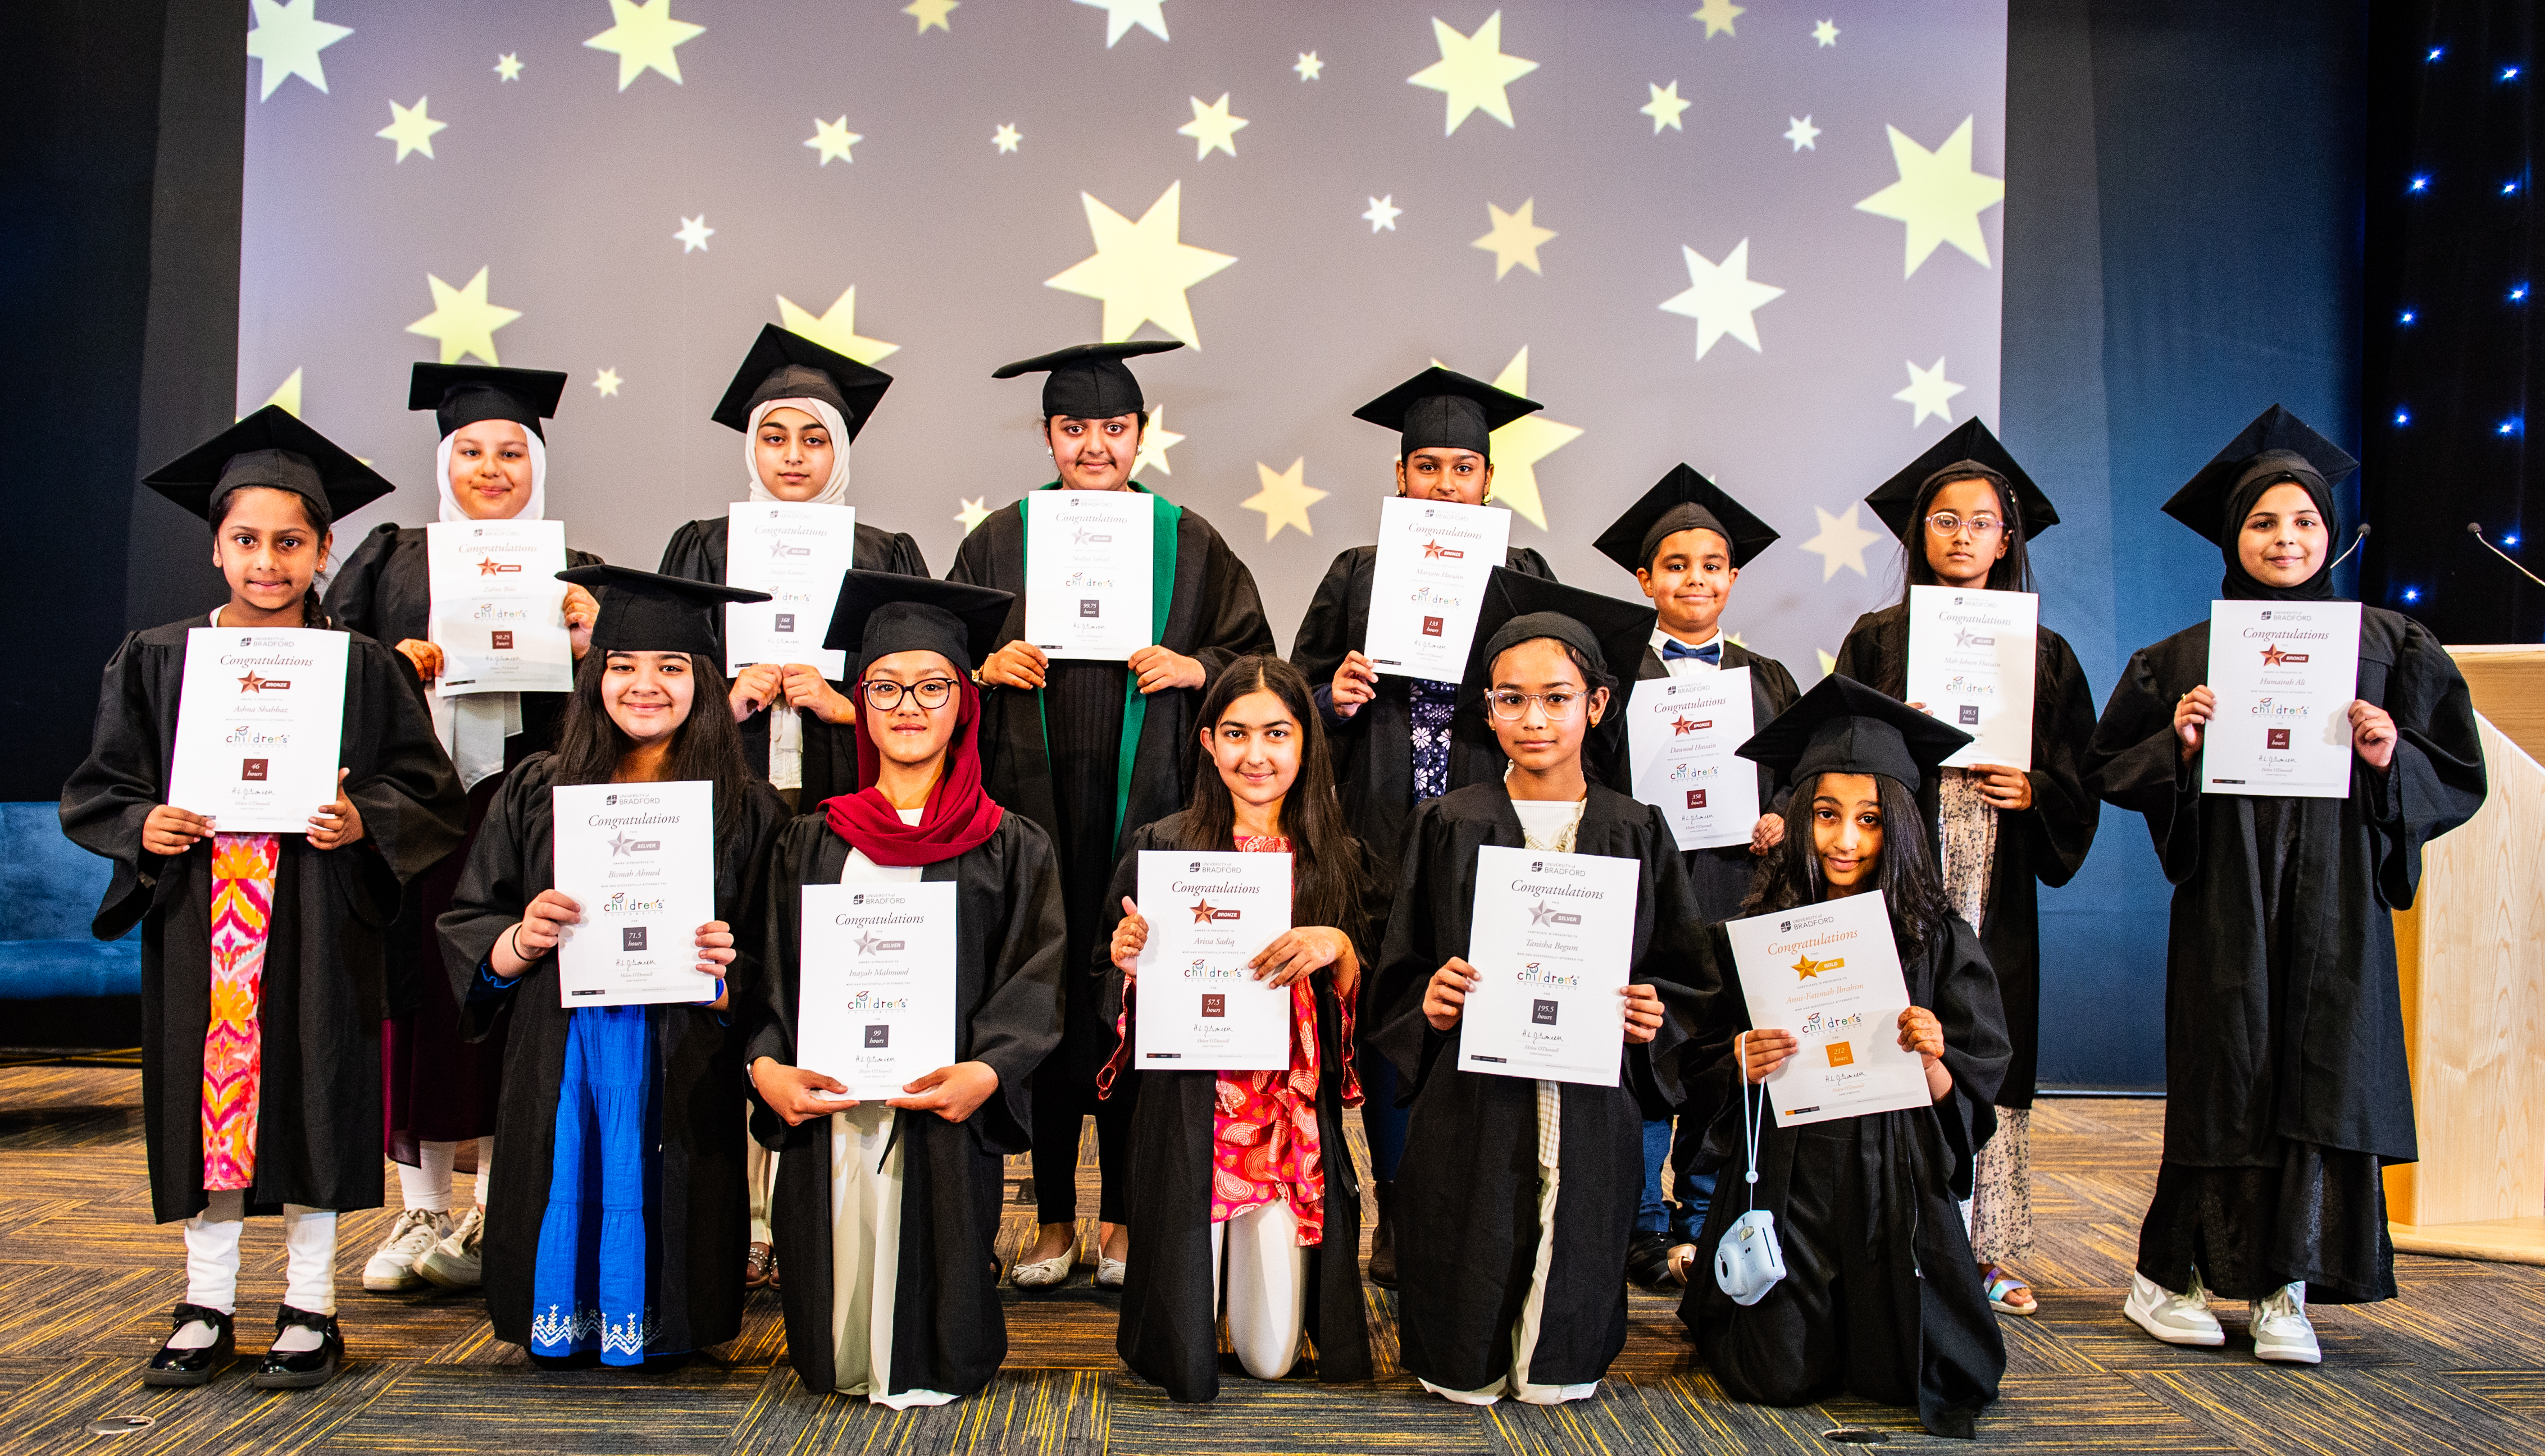 Children in graduation robes with certificates